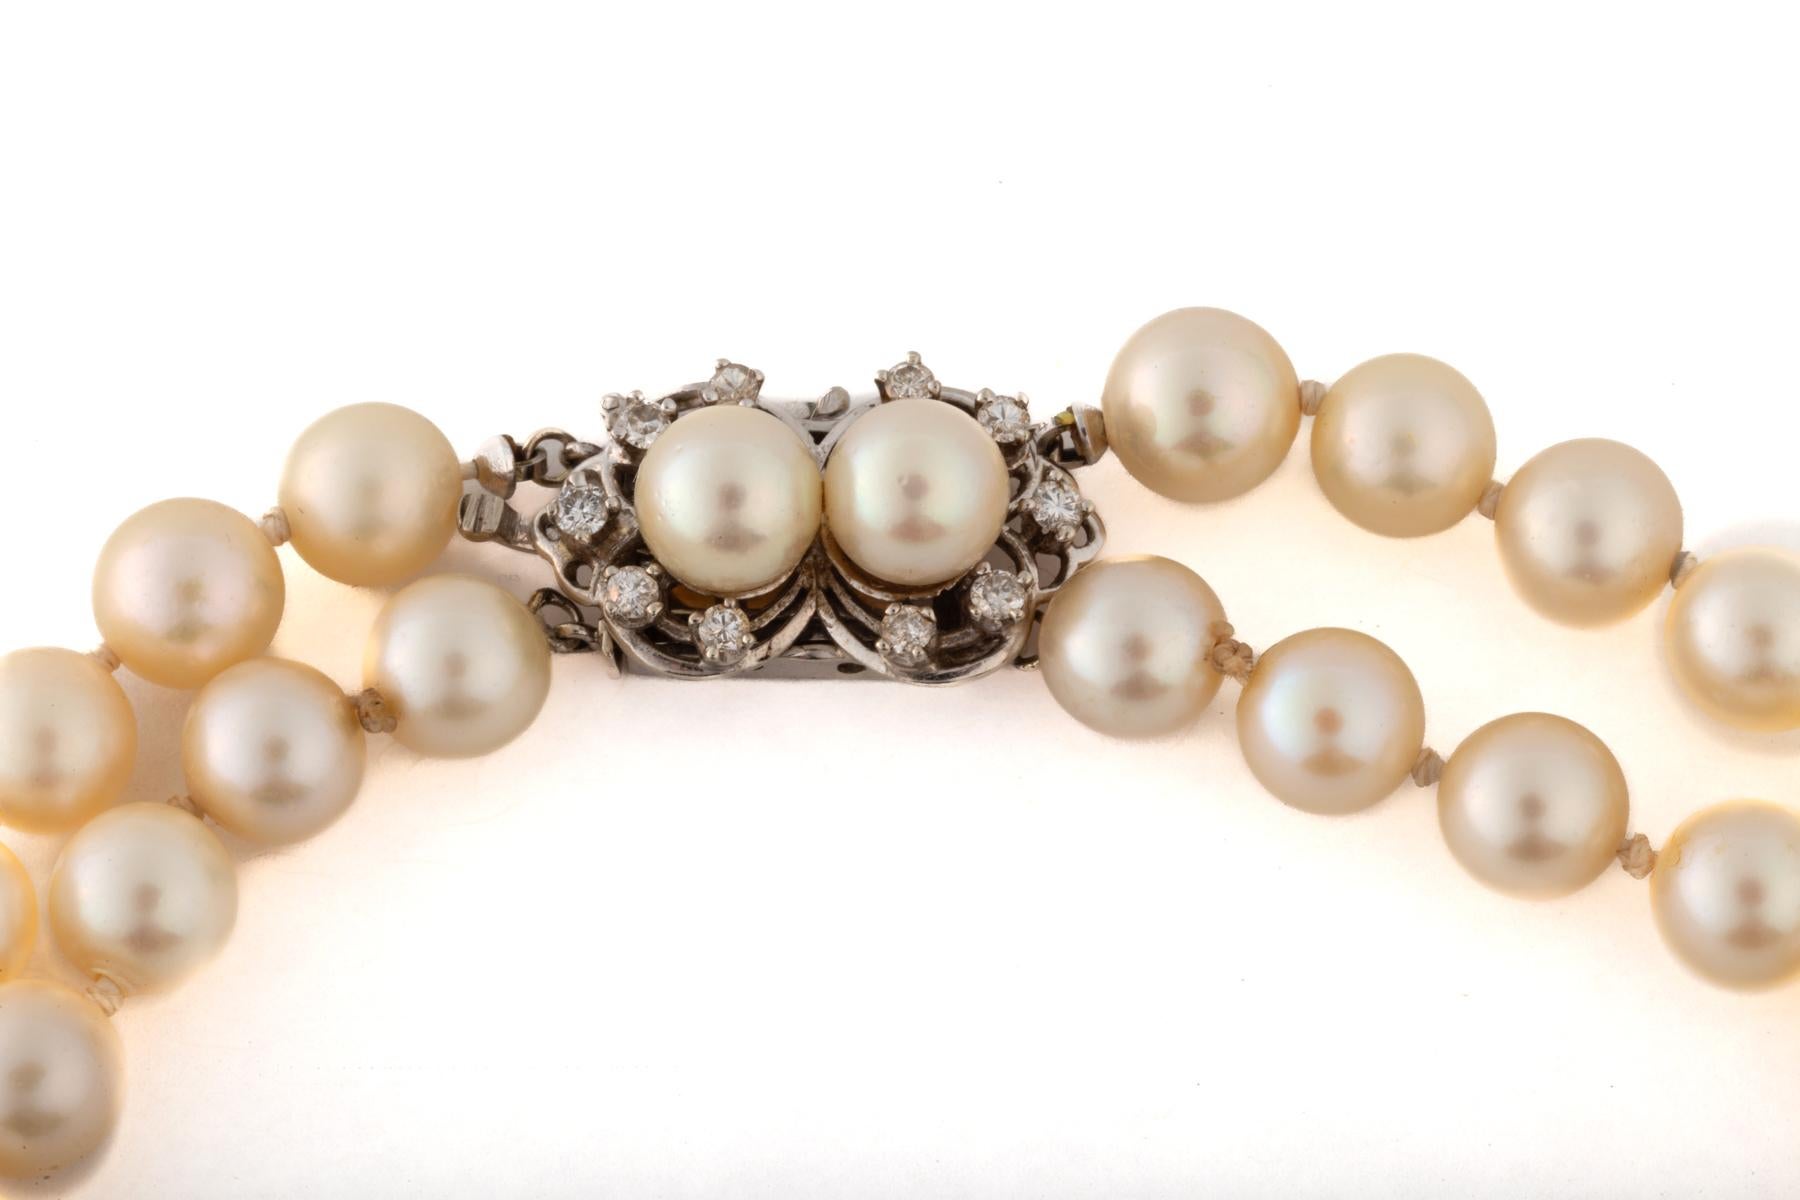 A double strand of 7.143 mm cultured pearls close with a beautiful pearl and diamond clasp. Pearls are classic worn today as well as in the Georgian Period. These strands are cream in color with a touch of pink. The beads are knotted individually